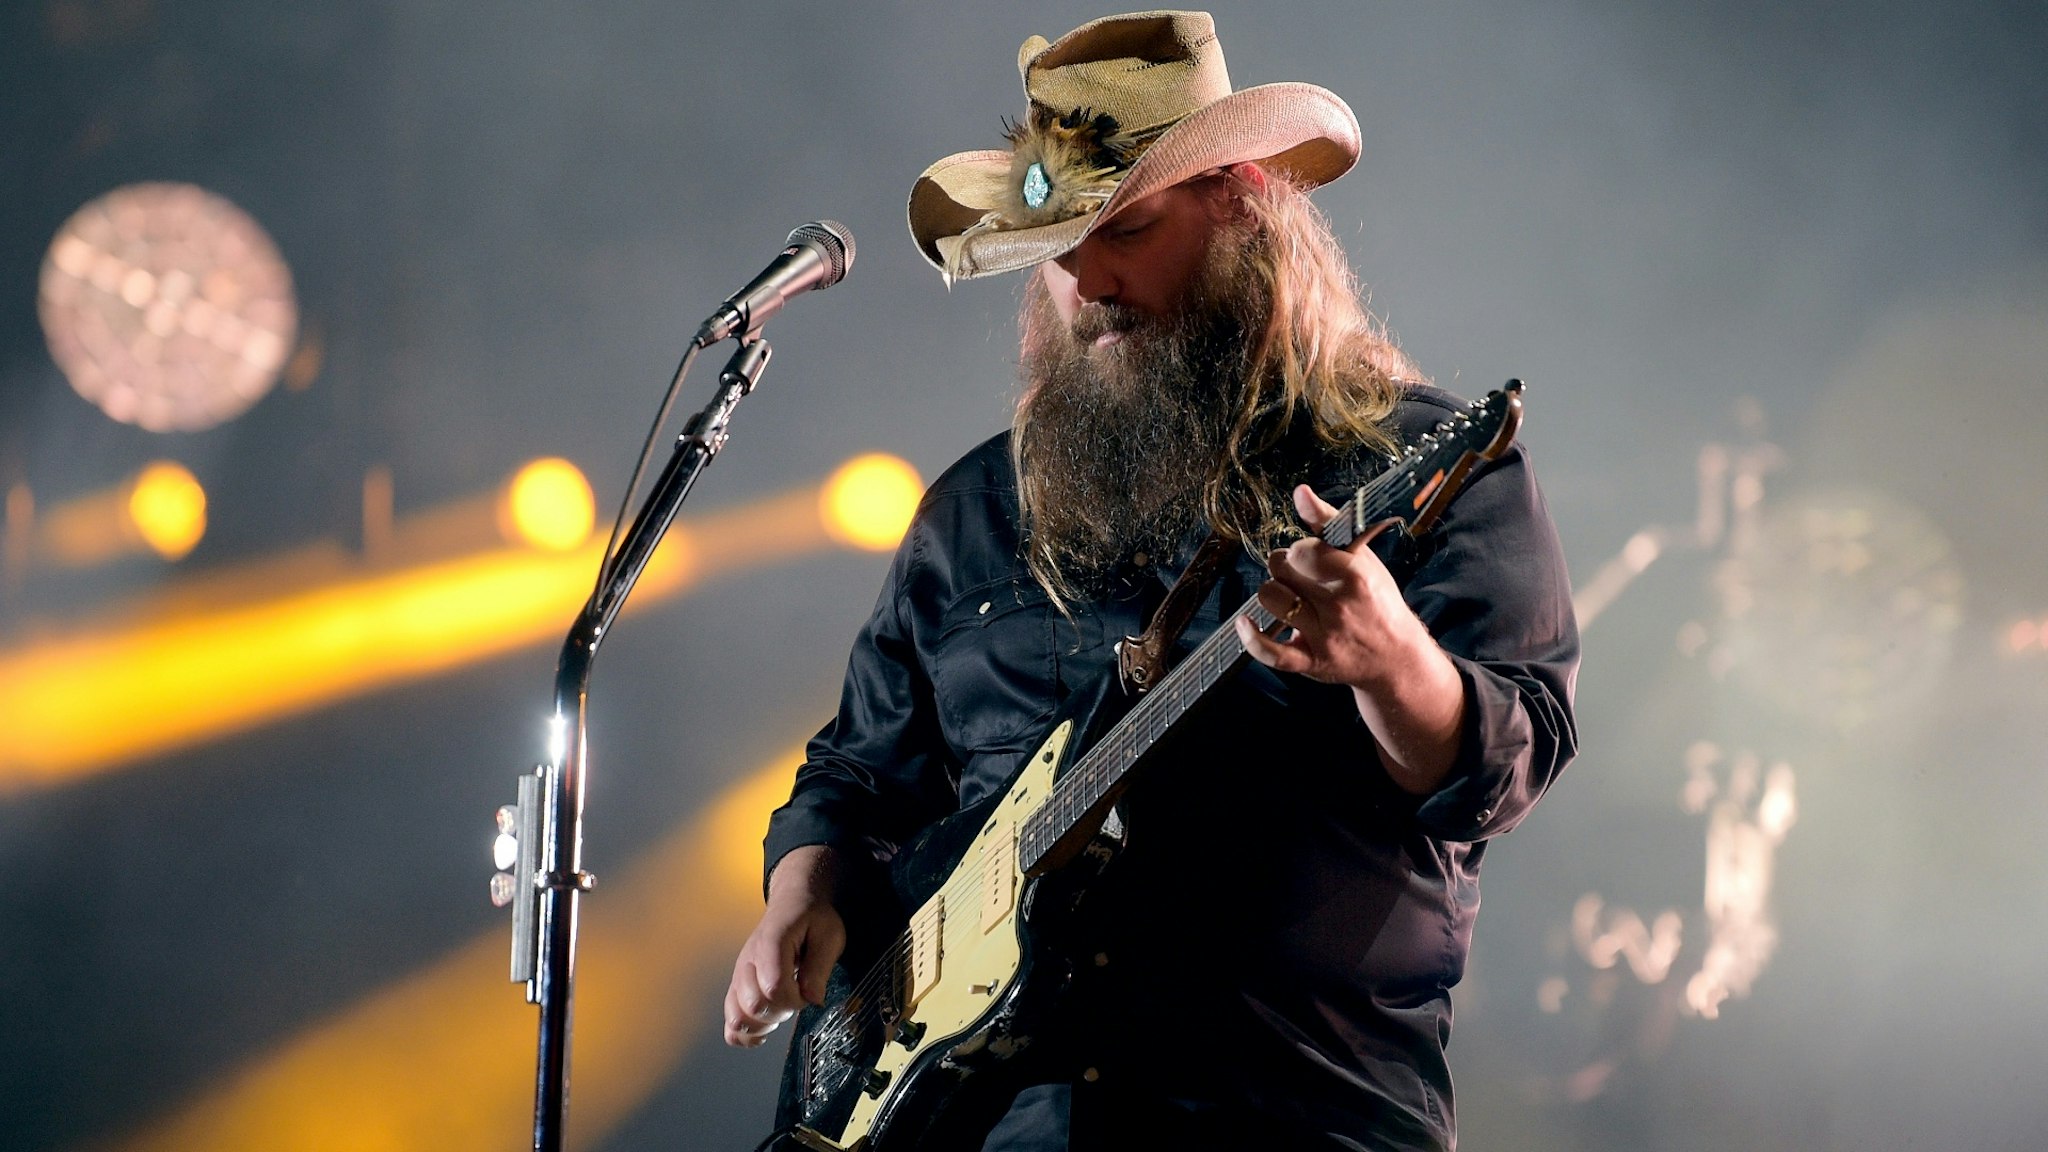 Chris Stapleton performs onstage during the 2018 CMA Music festival at Nissan Stadium on June 9, 2018 in Nashville, Tennessee.